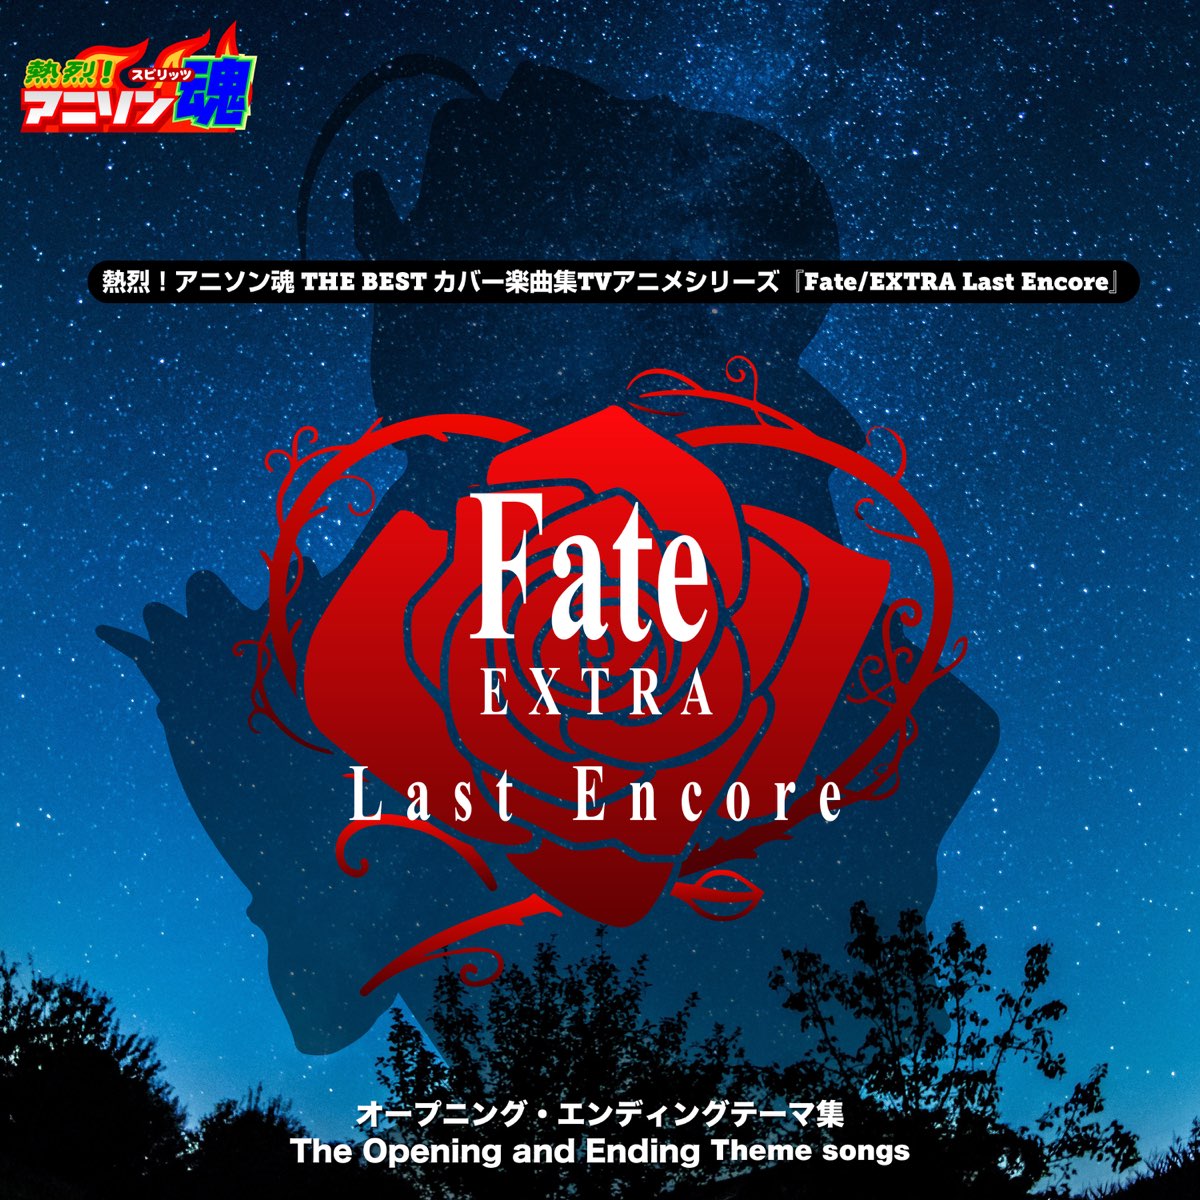 Netsuretsu Anison Spirits The Best Cover Music Selection Tv Anime Series Fate Extra Last Encore Single By Masaki Cao On Apple Music